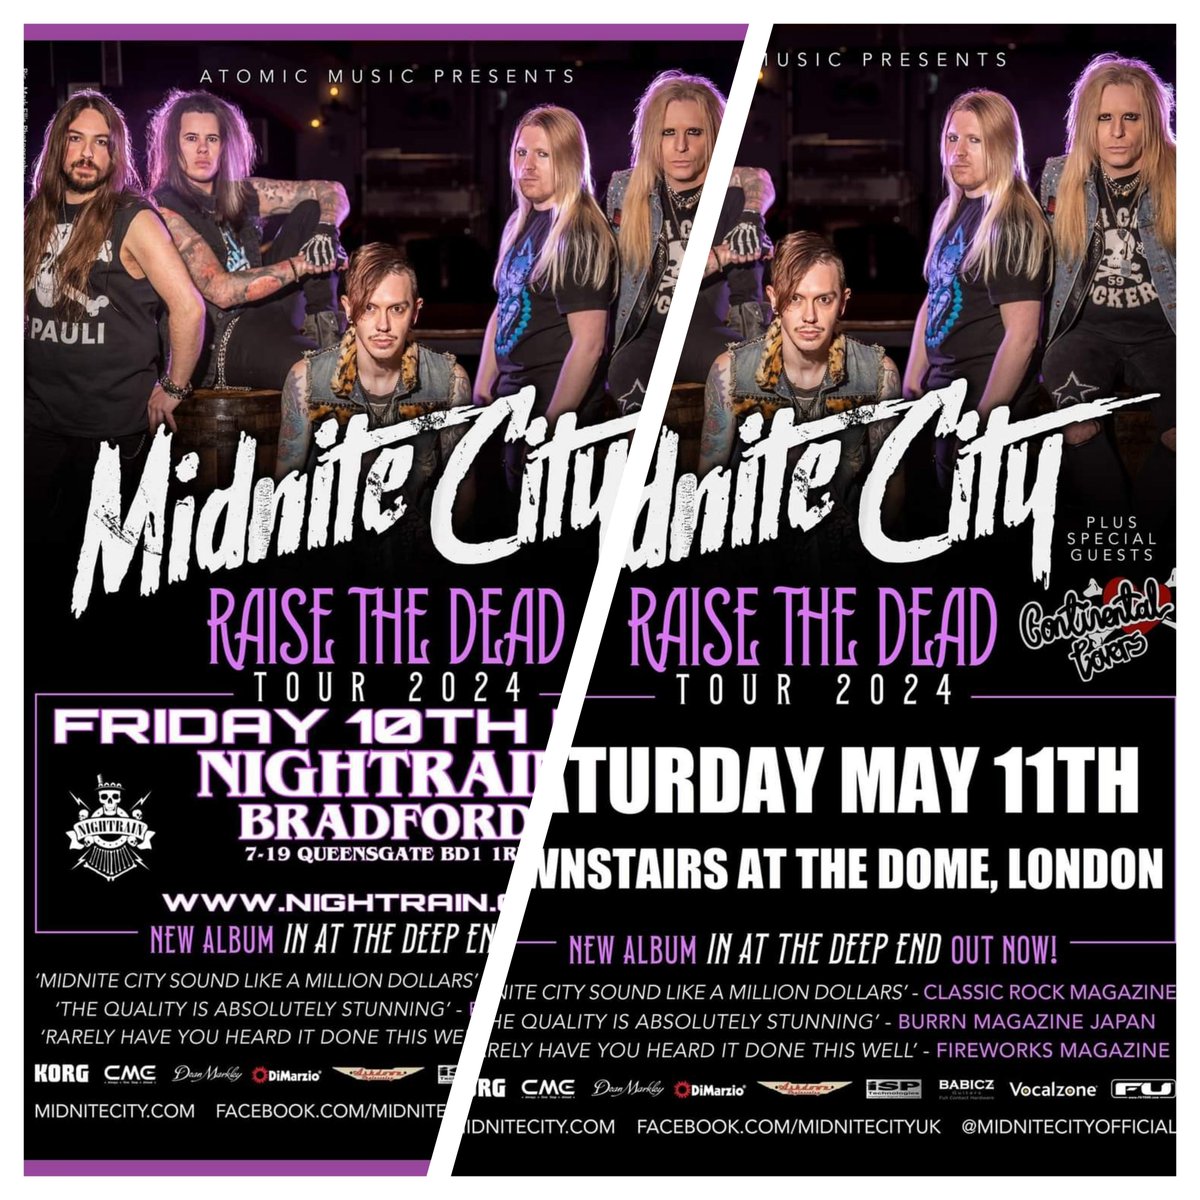 Final 2 dates of the RAISE THE DEAD UK TOUR this weekend 💜 Friday - Nightrain, Bradford Saturday - The Dome, London Tickets via link below 👇 linktr.ee/midnitecityoff…